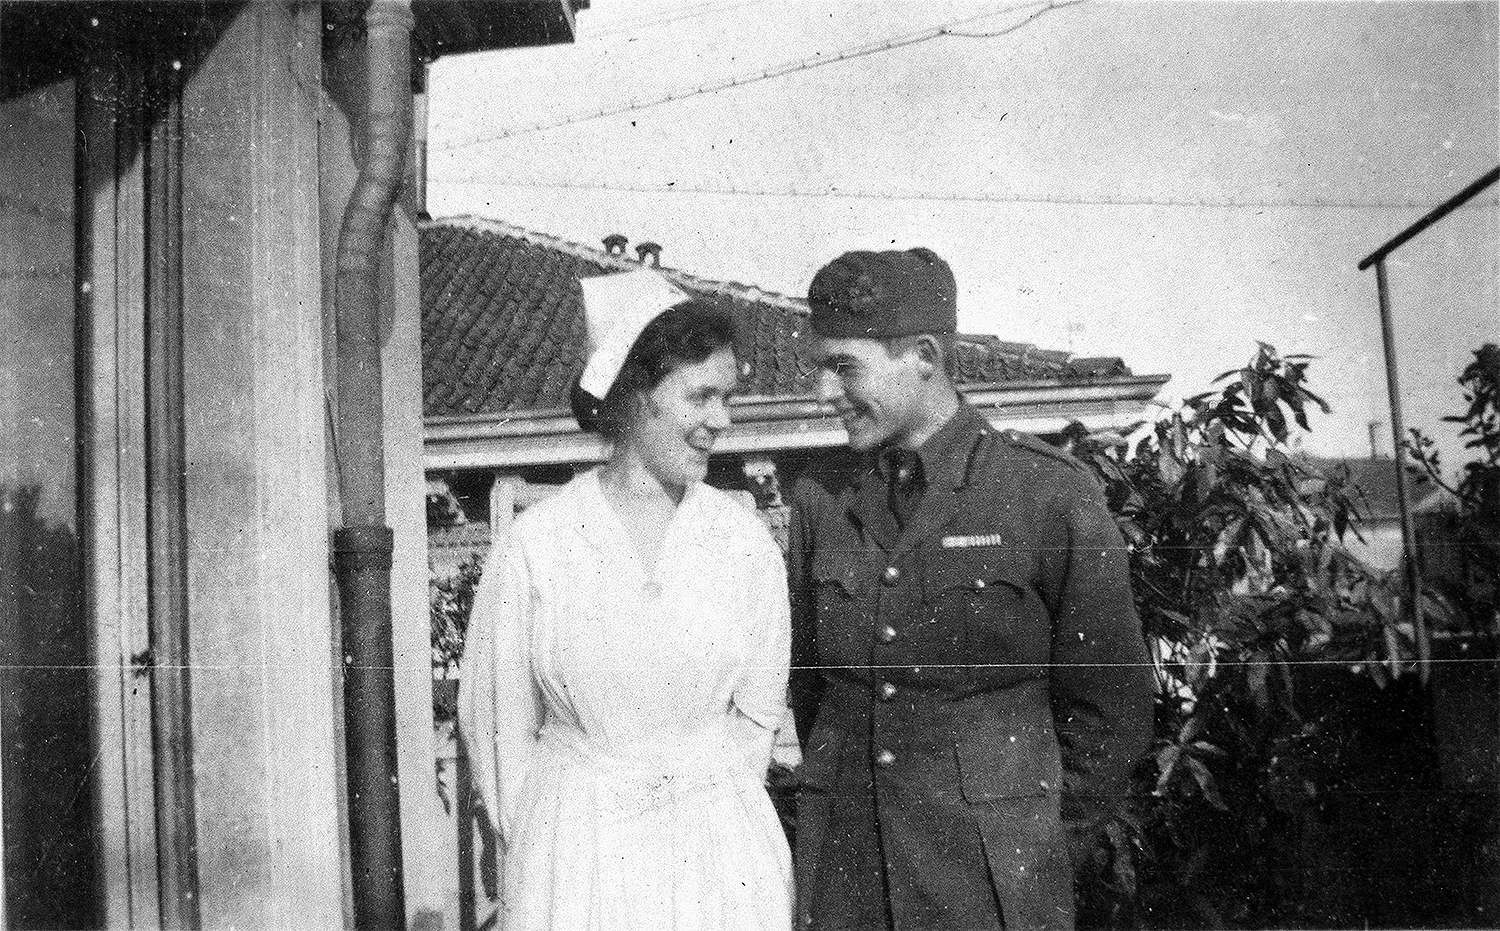 Agnes von Kurowsky and Ernest Hemingway on the balcony of the Red Cross Hospital, Milan, during World War I.